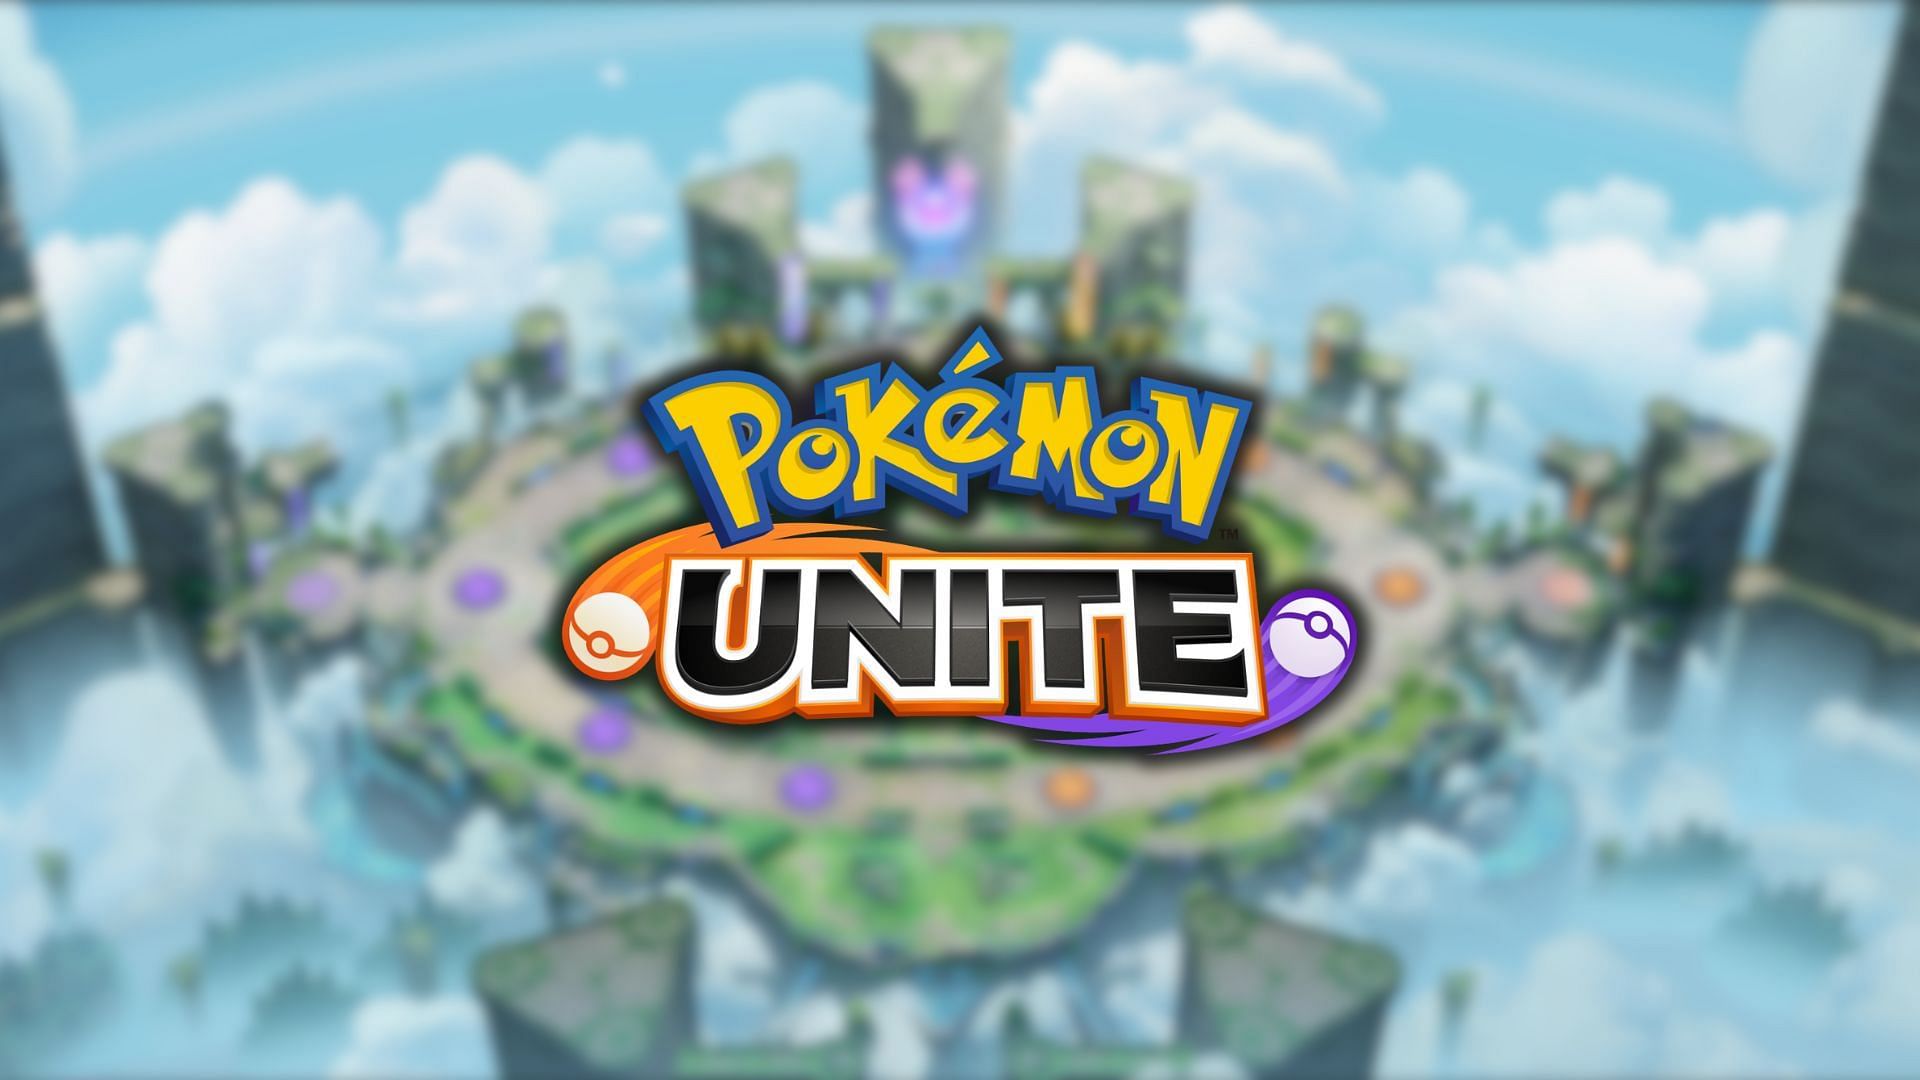 &quot;Time to do literally anything but participate in this new season&quot;: Pokemon Unite reddit reacts